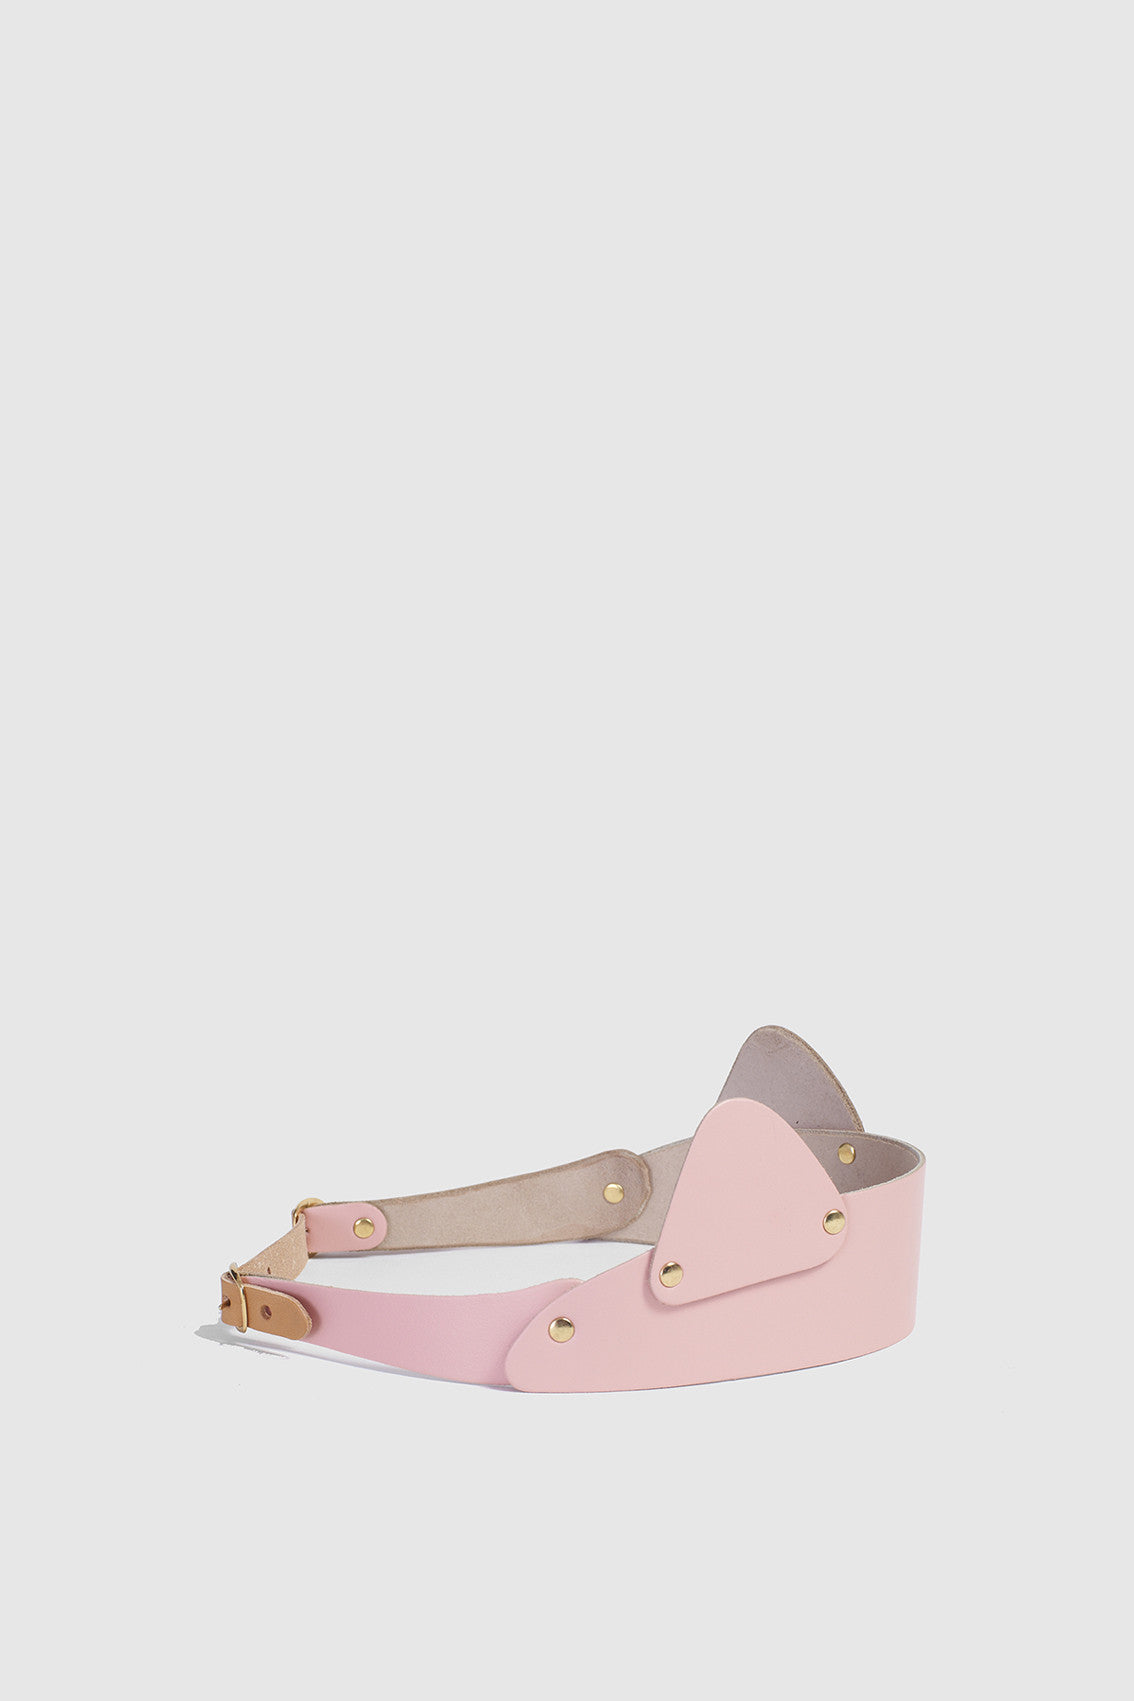 Pink Cat Ear Leather band  £169